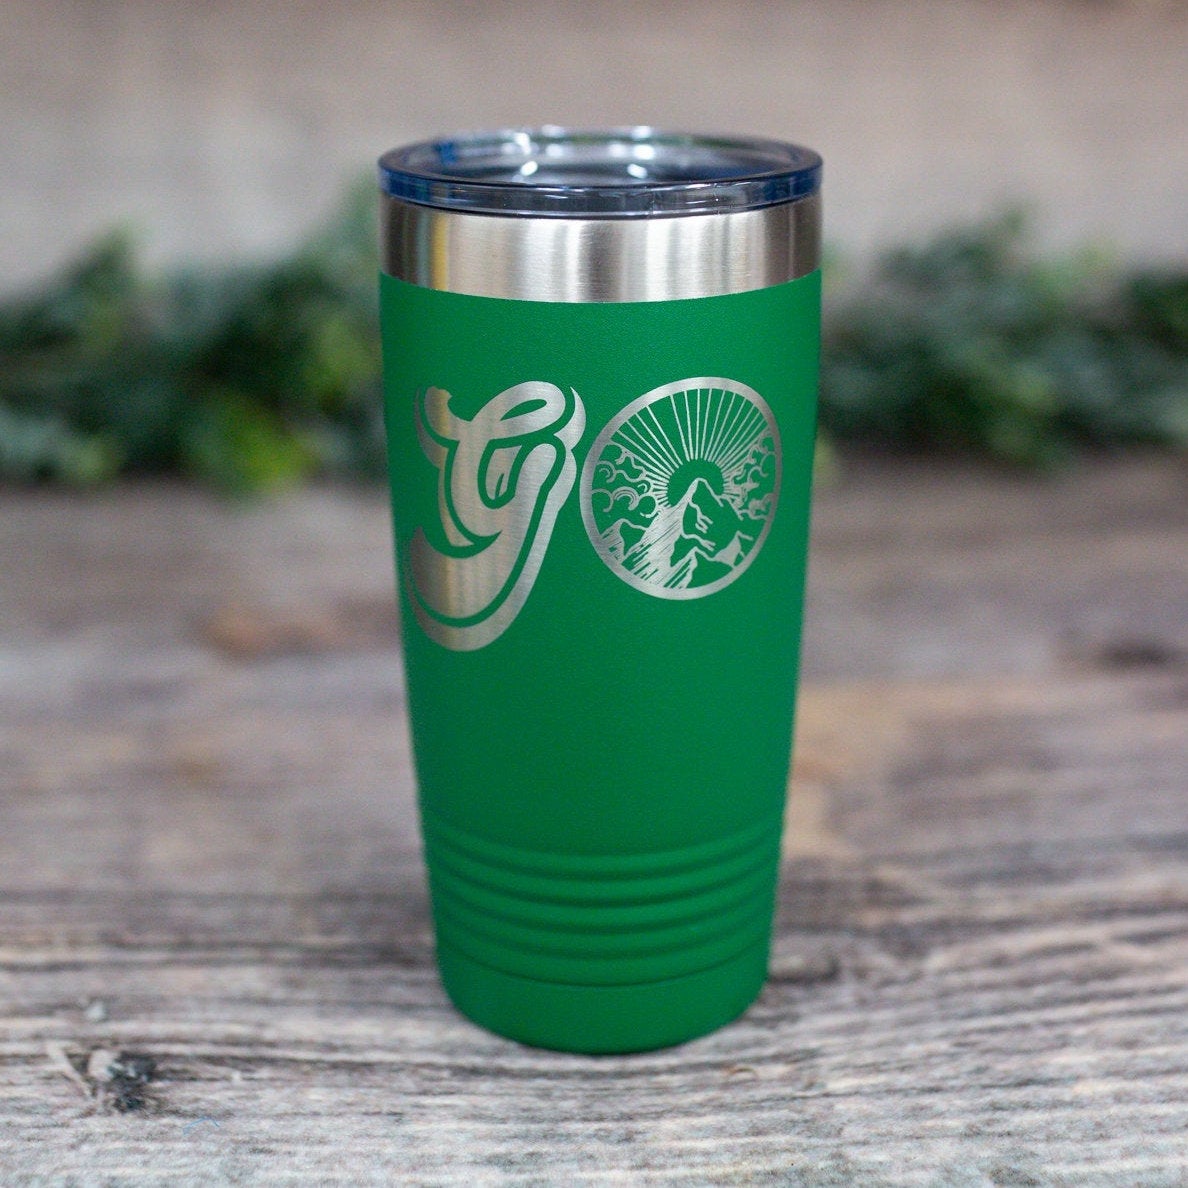 https://3cetching.com/wp-content/uploads/2021/07/go-engraved-stainless-steel-tumbler-insulated-travel-mug-outdoor-traveler-gift-tumbler-60f73bd5.jpg